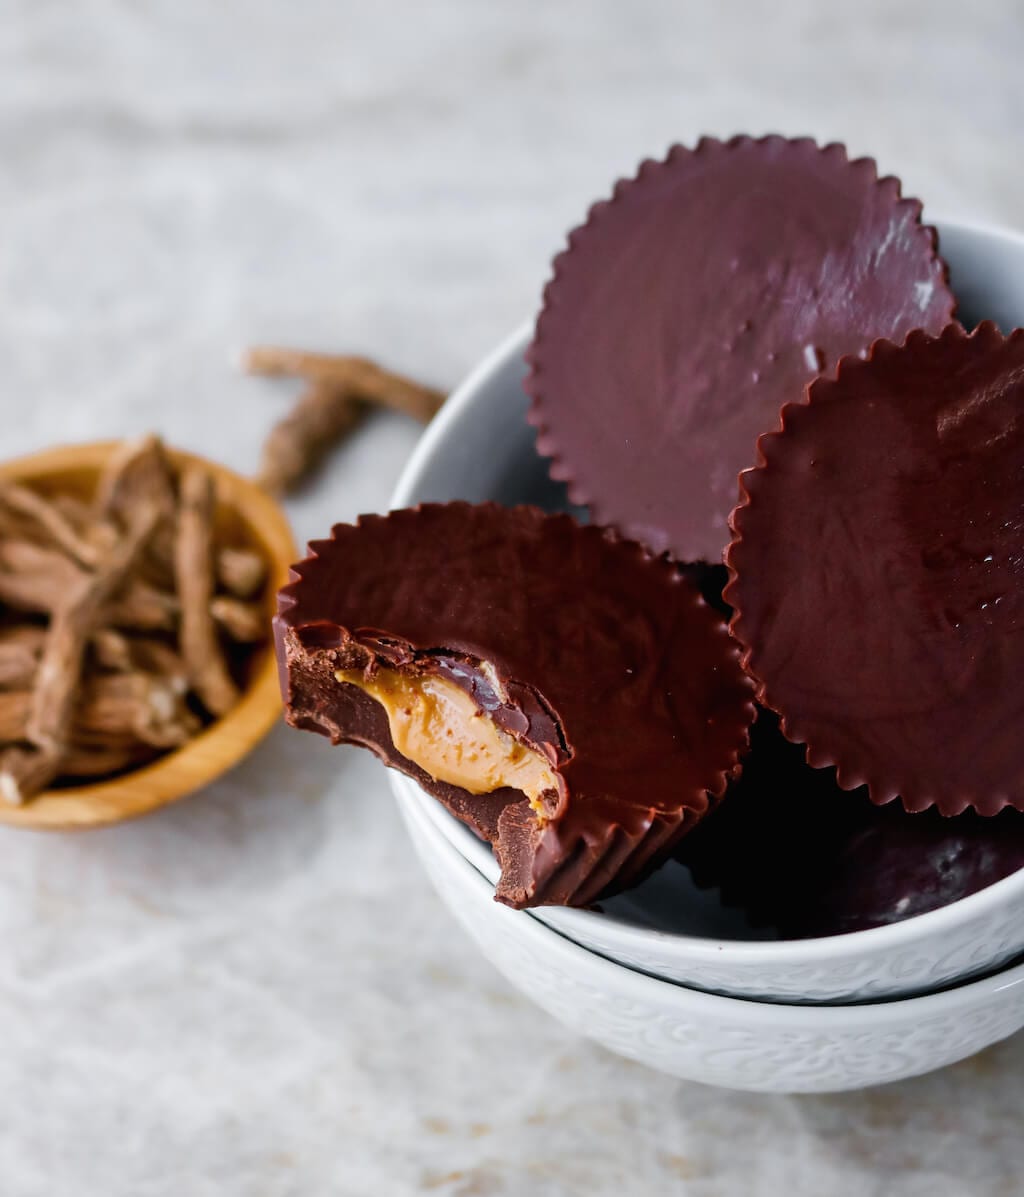 A quick and easy recipe for making hormone-balancing almond butter cups.